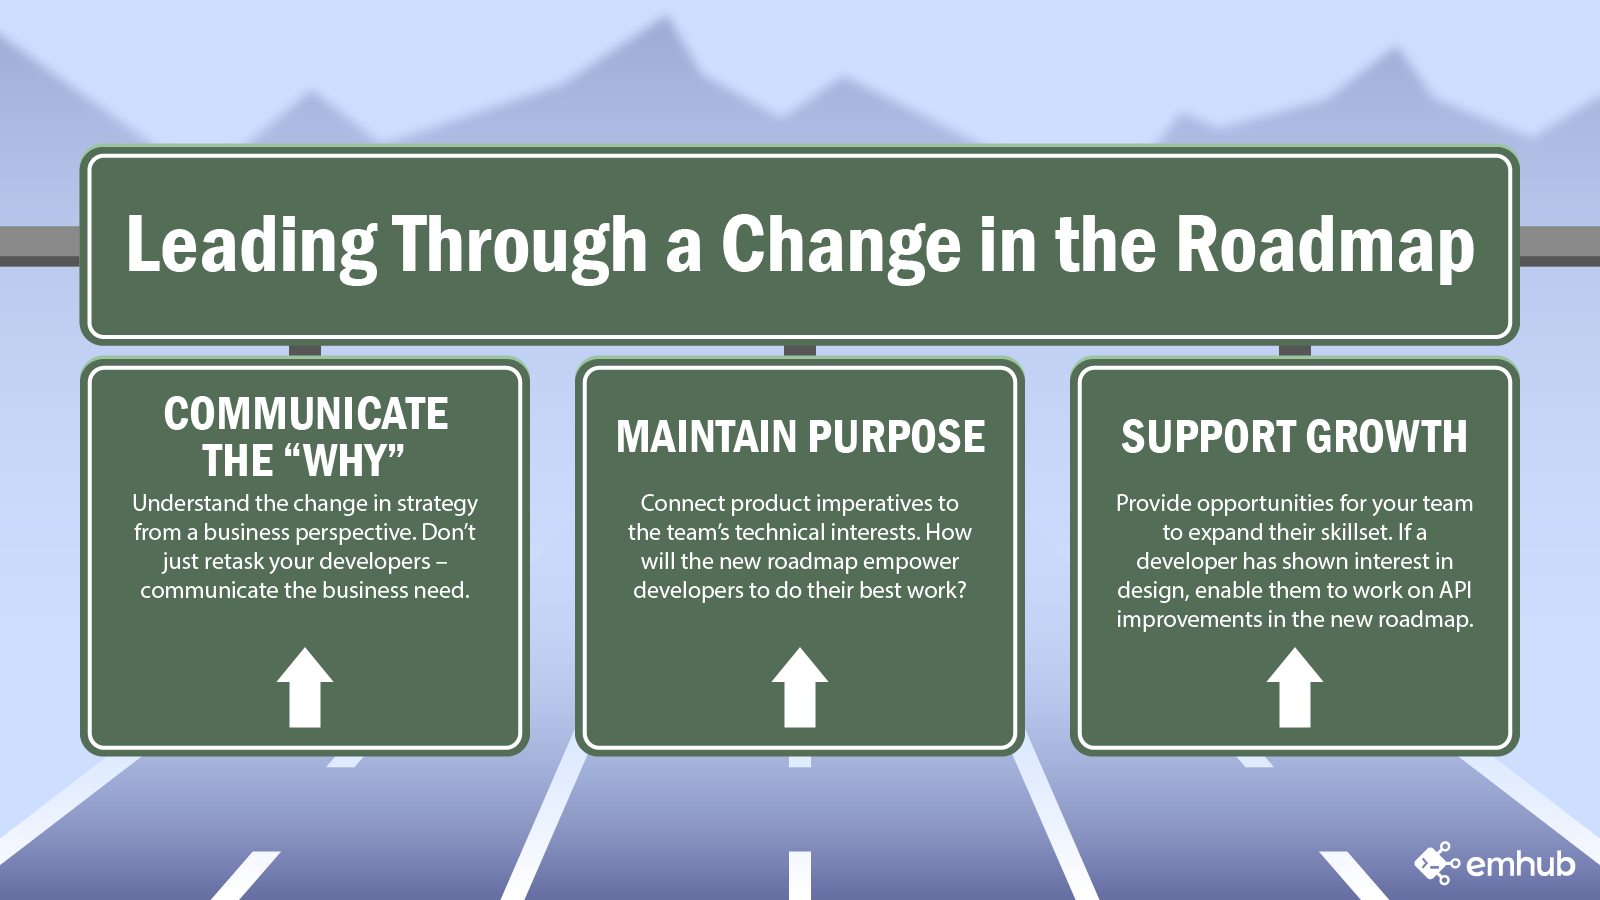 Change in Roadmap Infographic1